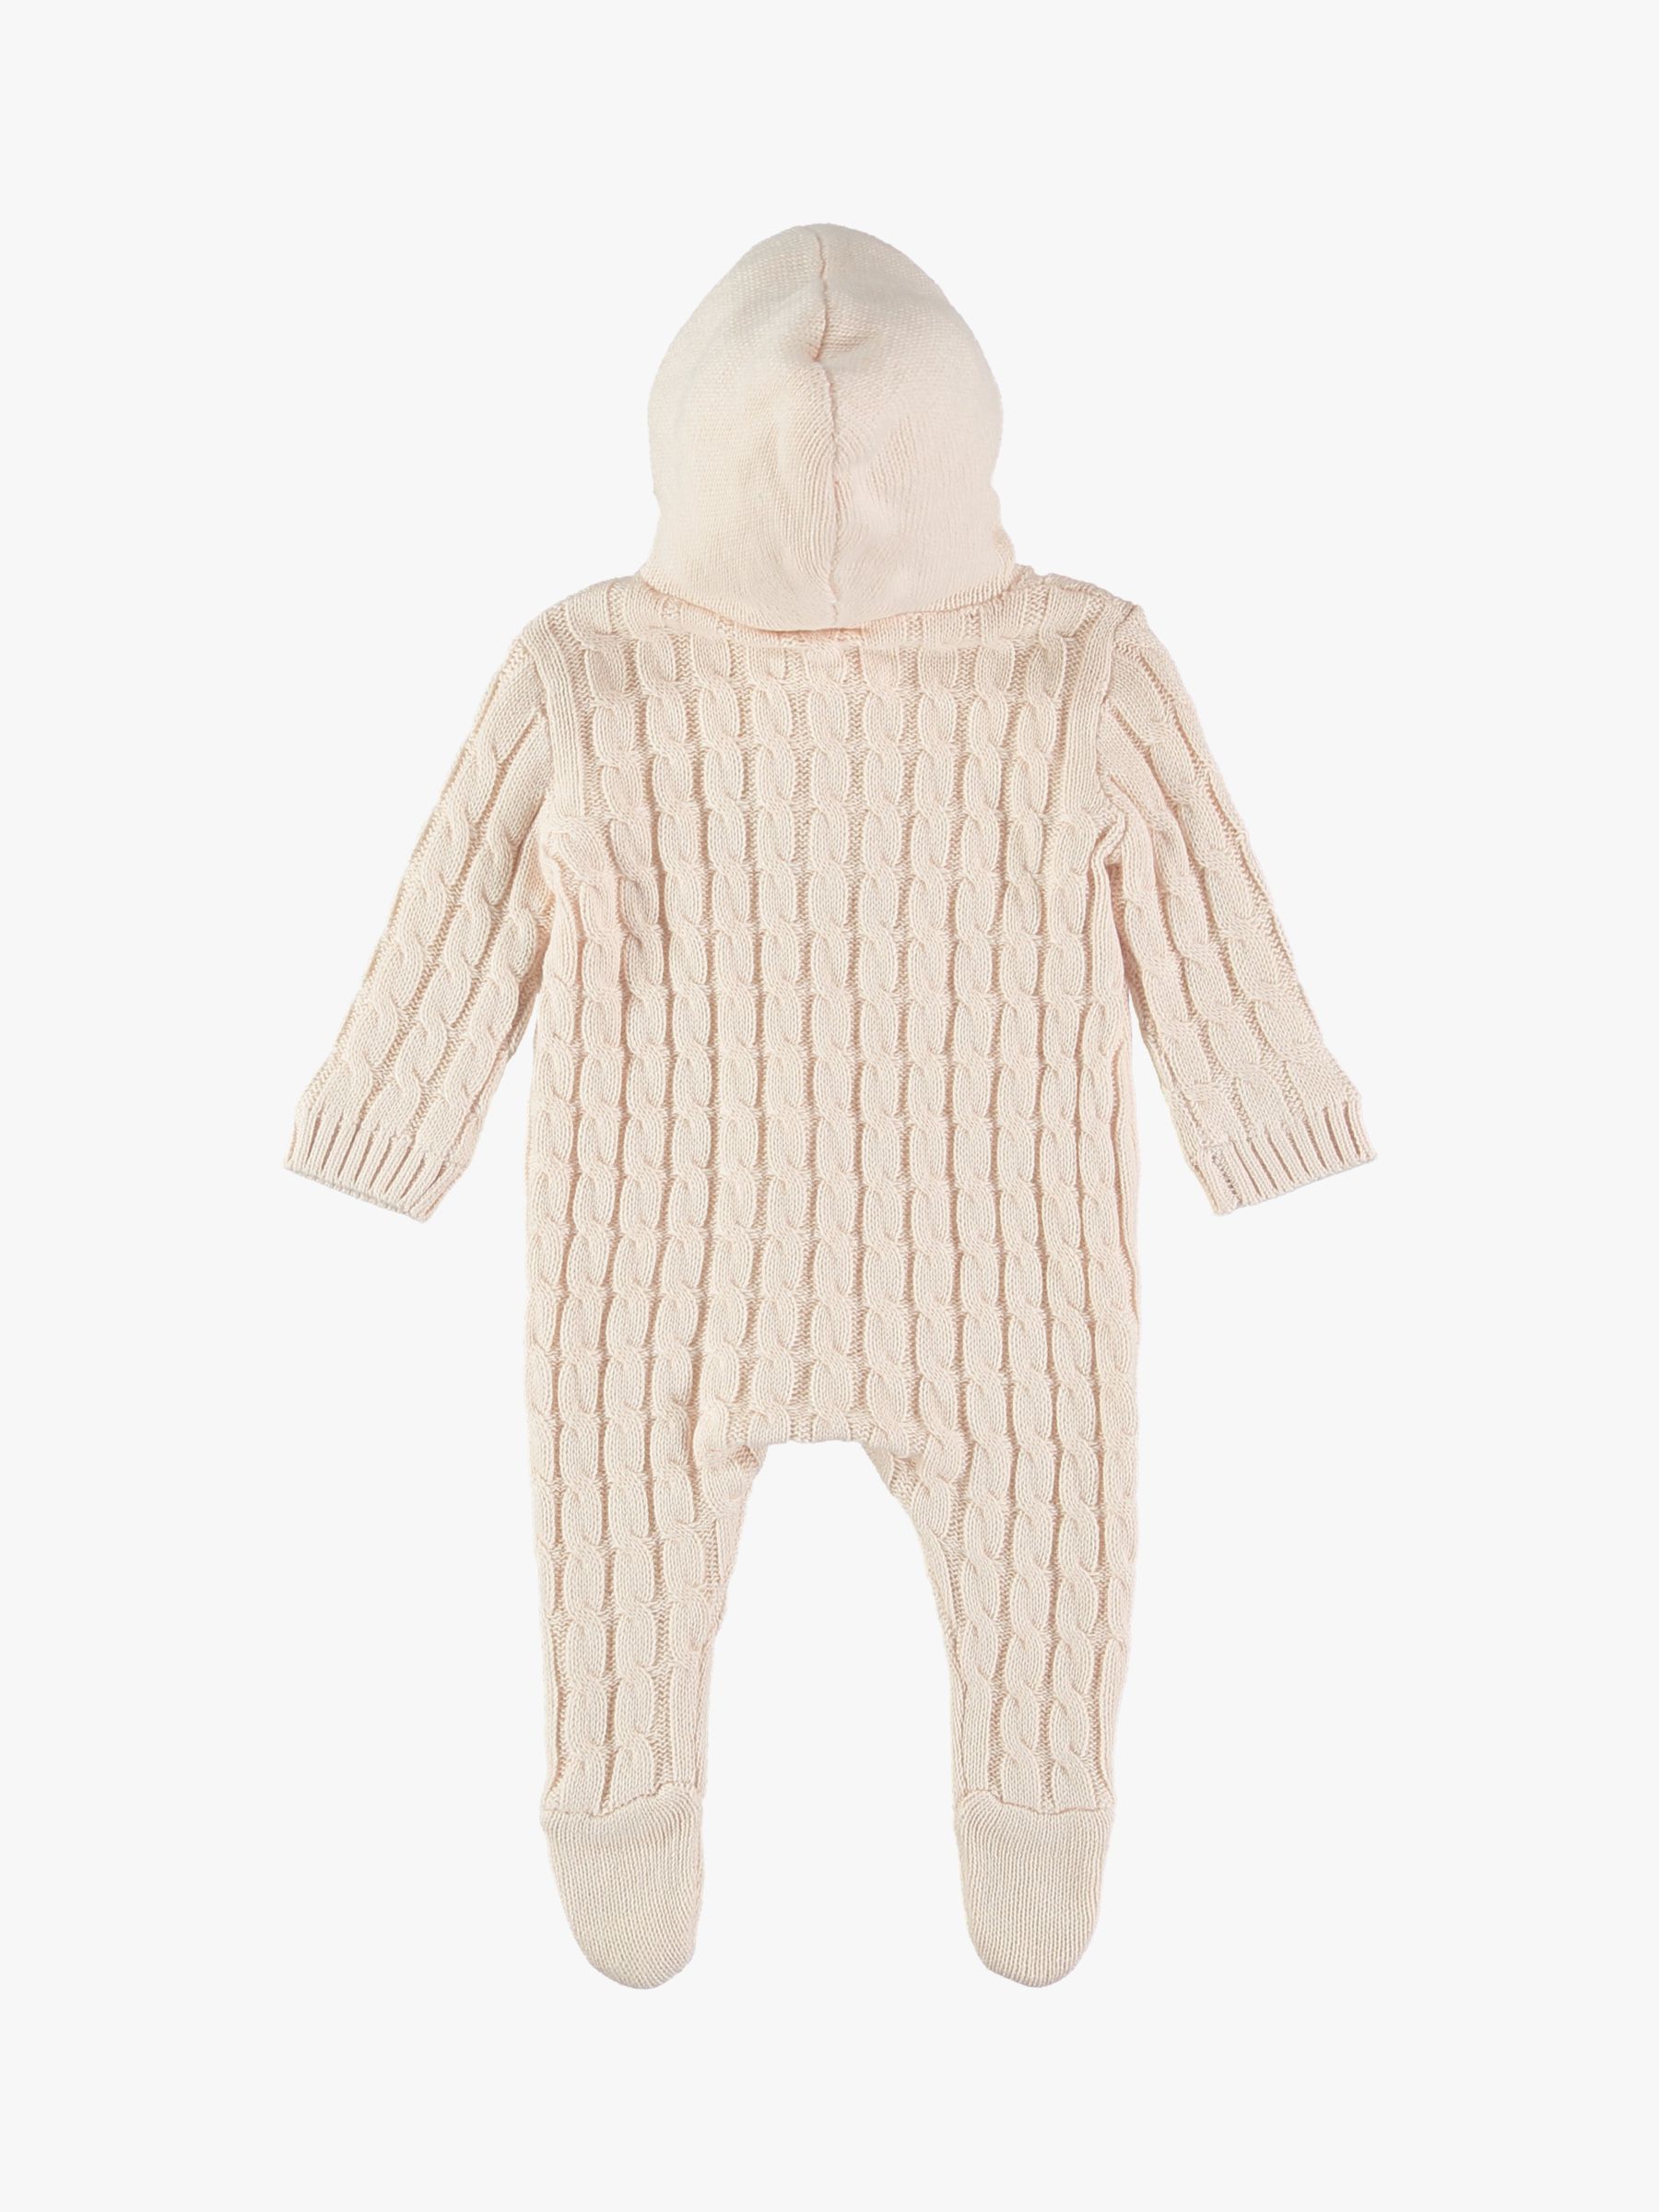 Buy The Little Tailor Baby Plain Cable Knit Lined Snowsuit Online at johnlewis.com